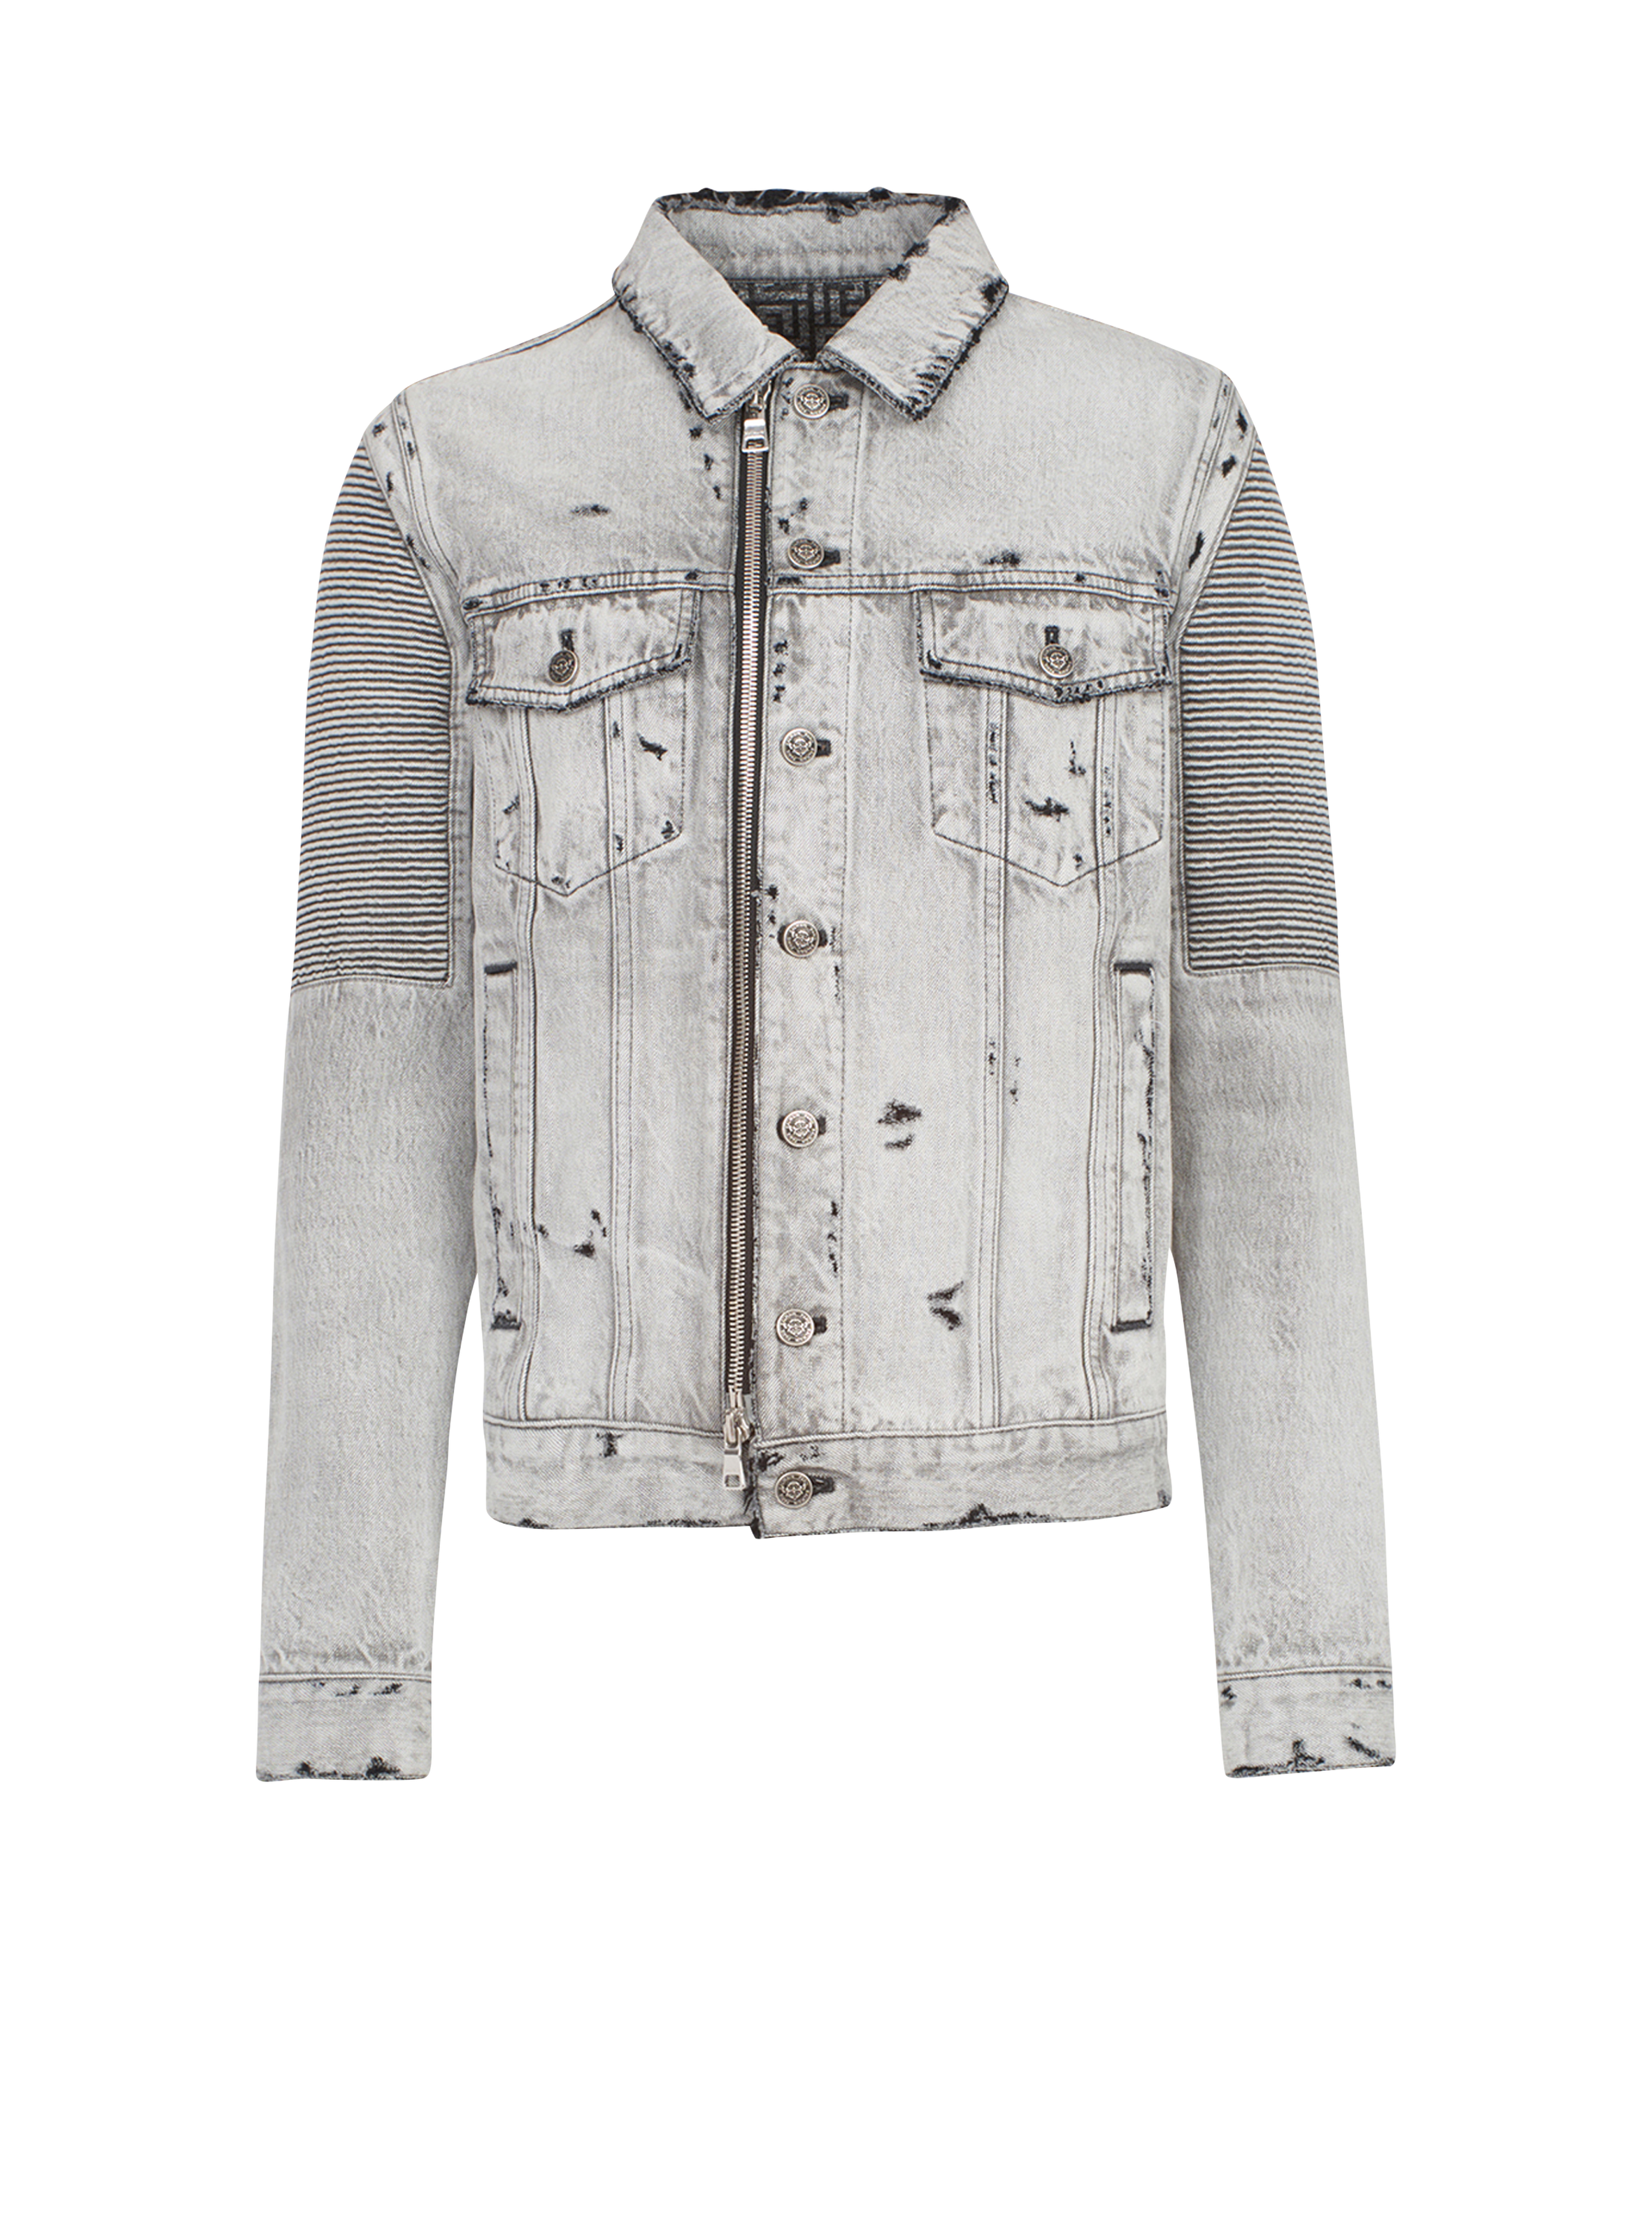 Faded and ripped jean jacket with ridged panels, grey